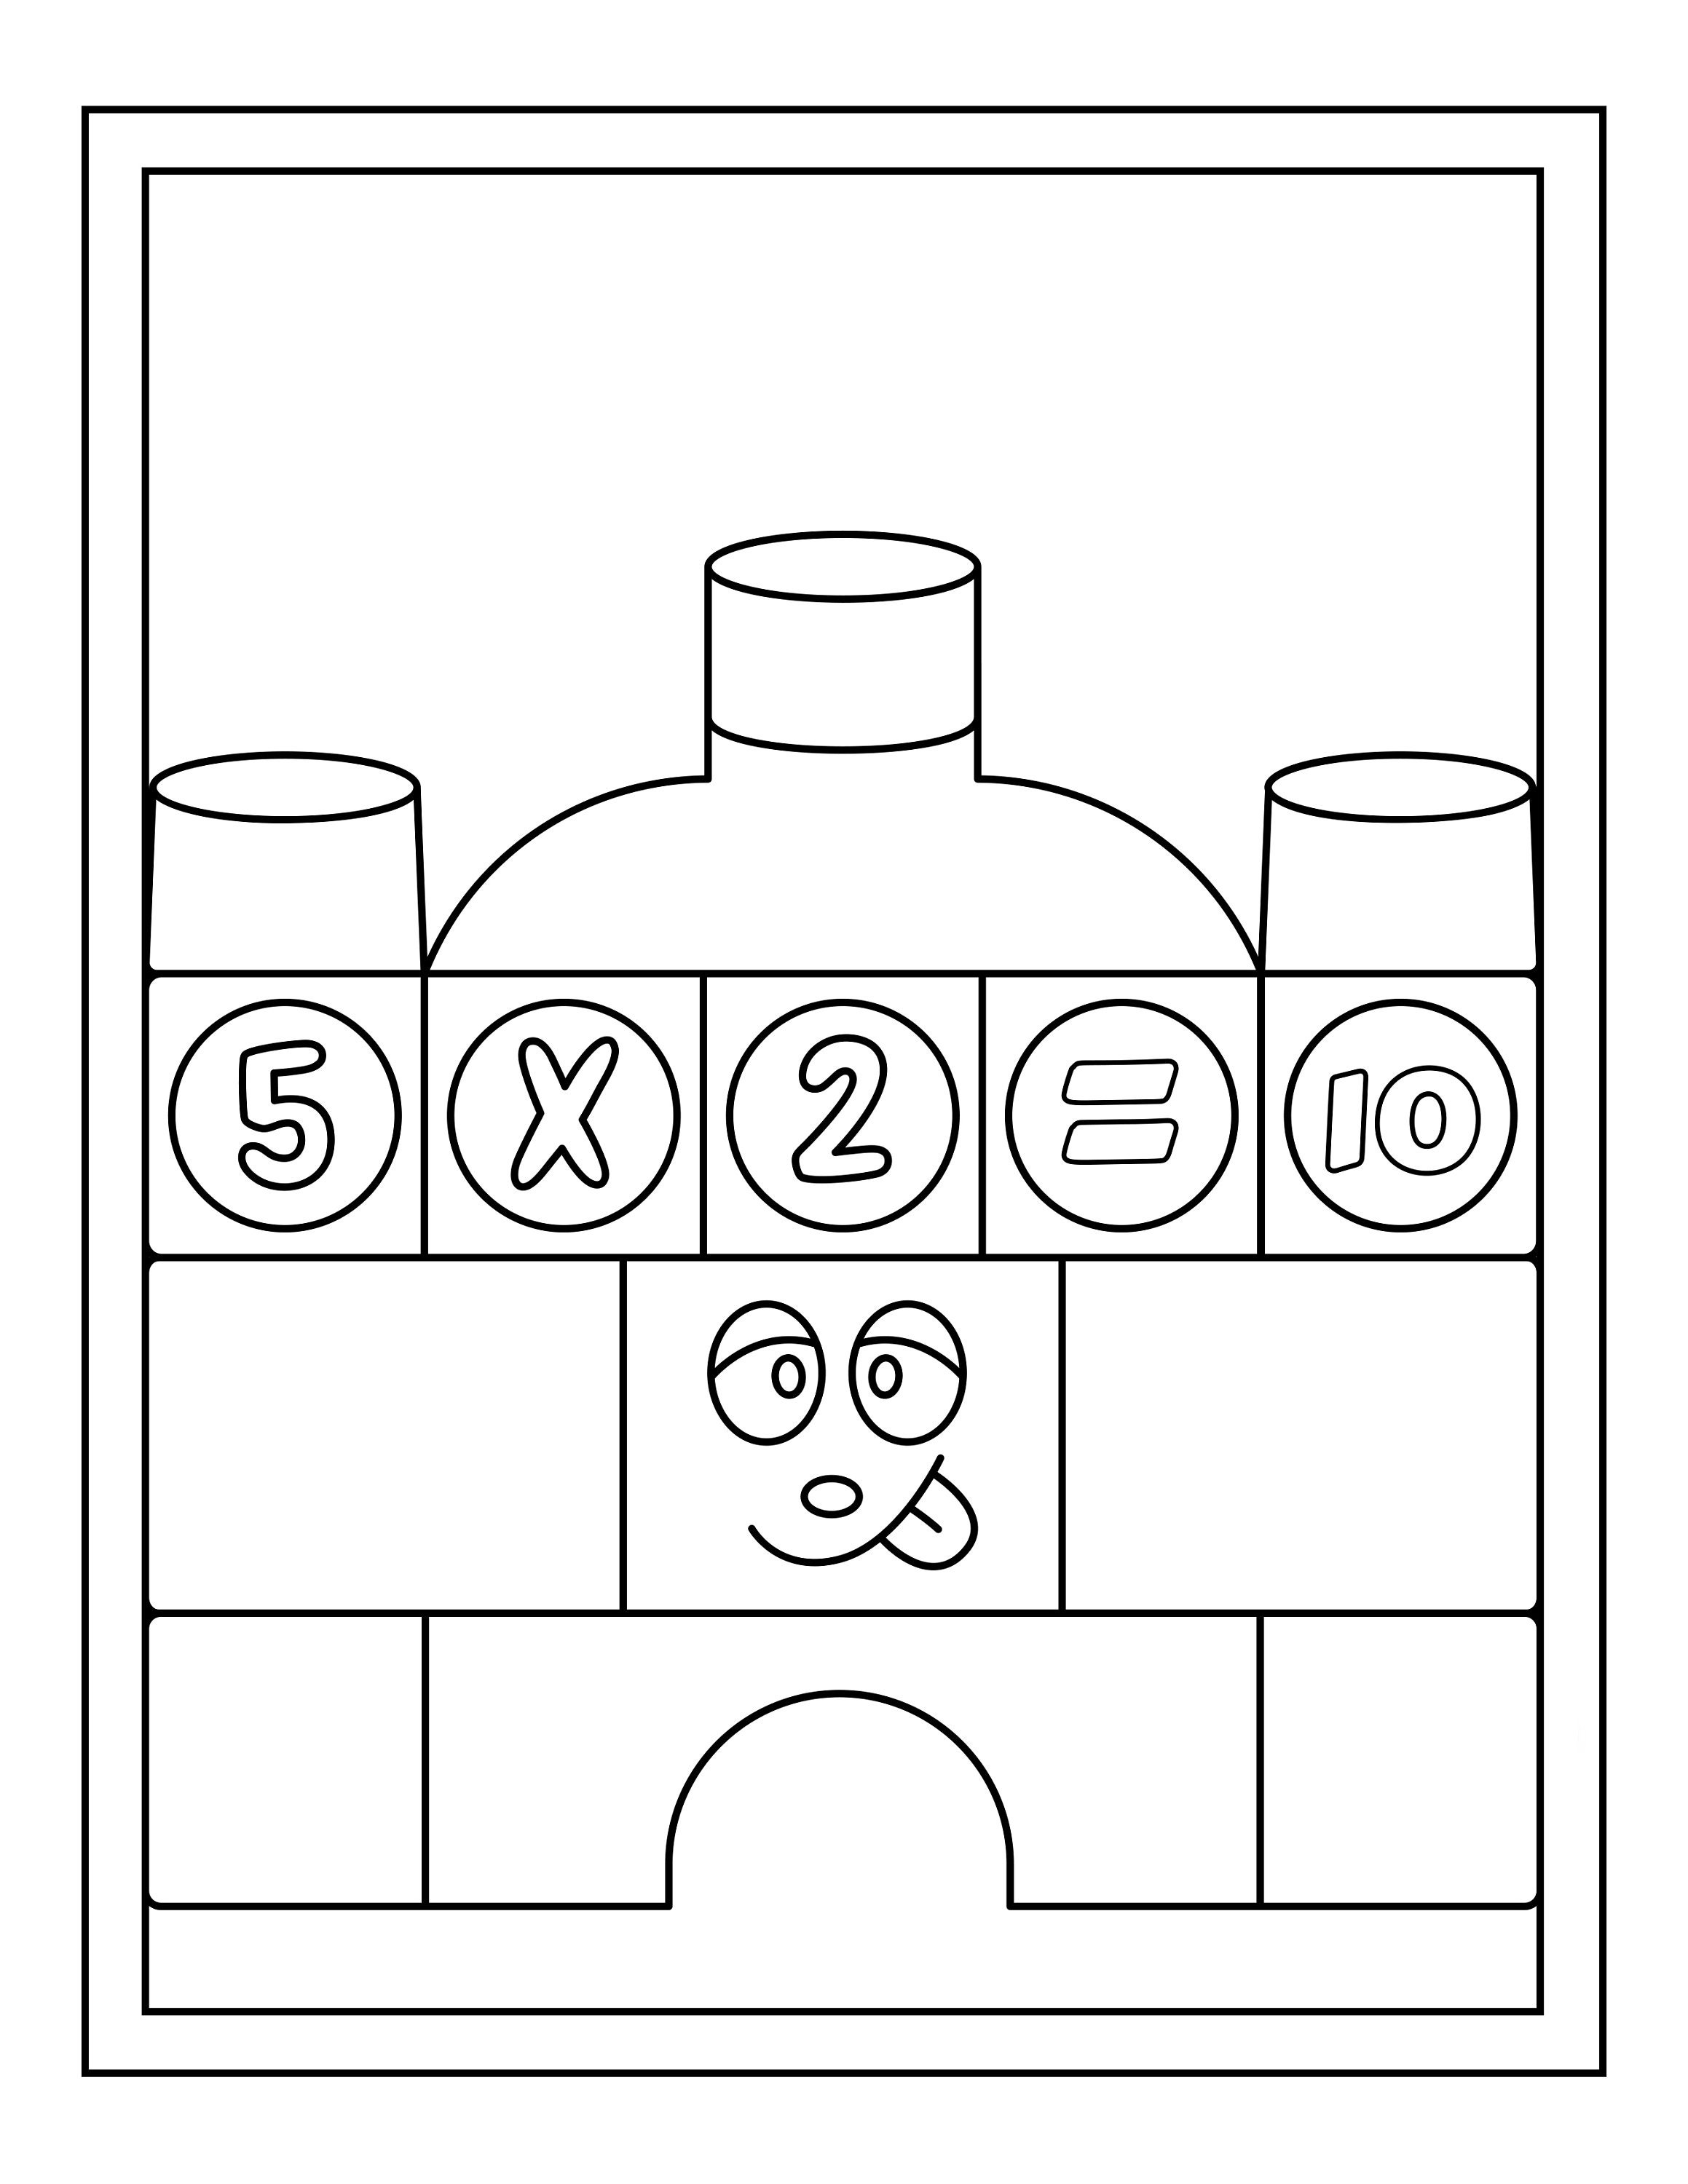 Blocks Coloring Pages 16 pages - Etsy